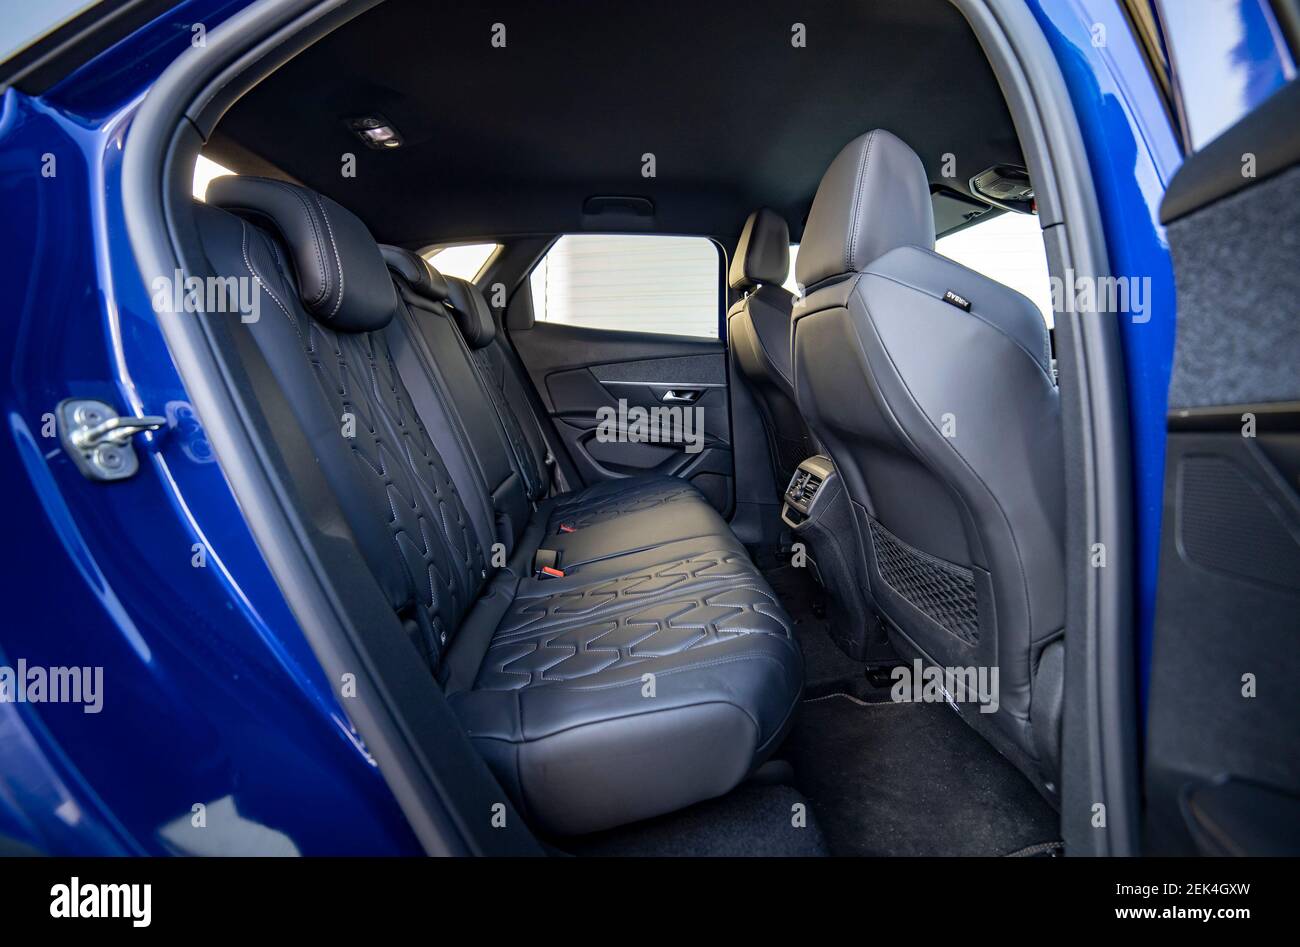 Row of passenger rear seats in blue car Stock Photo